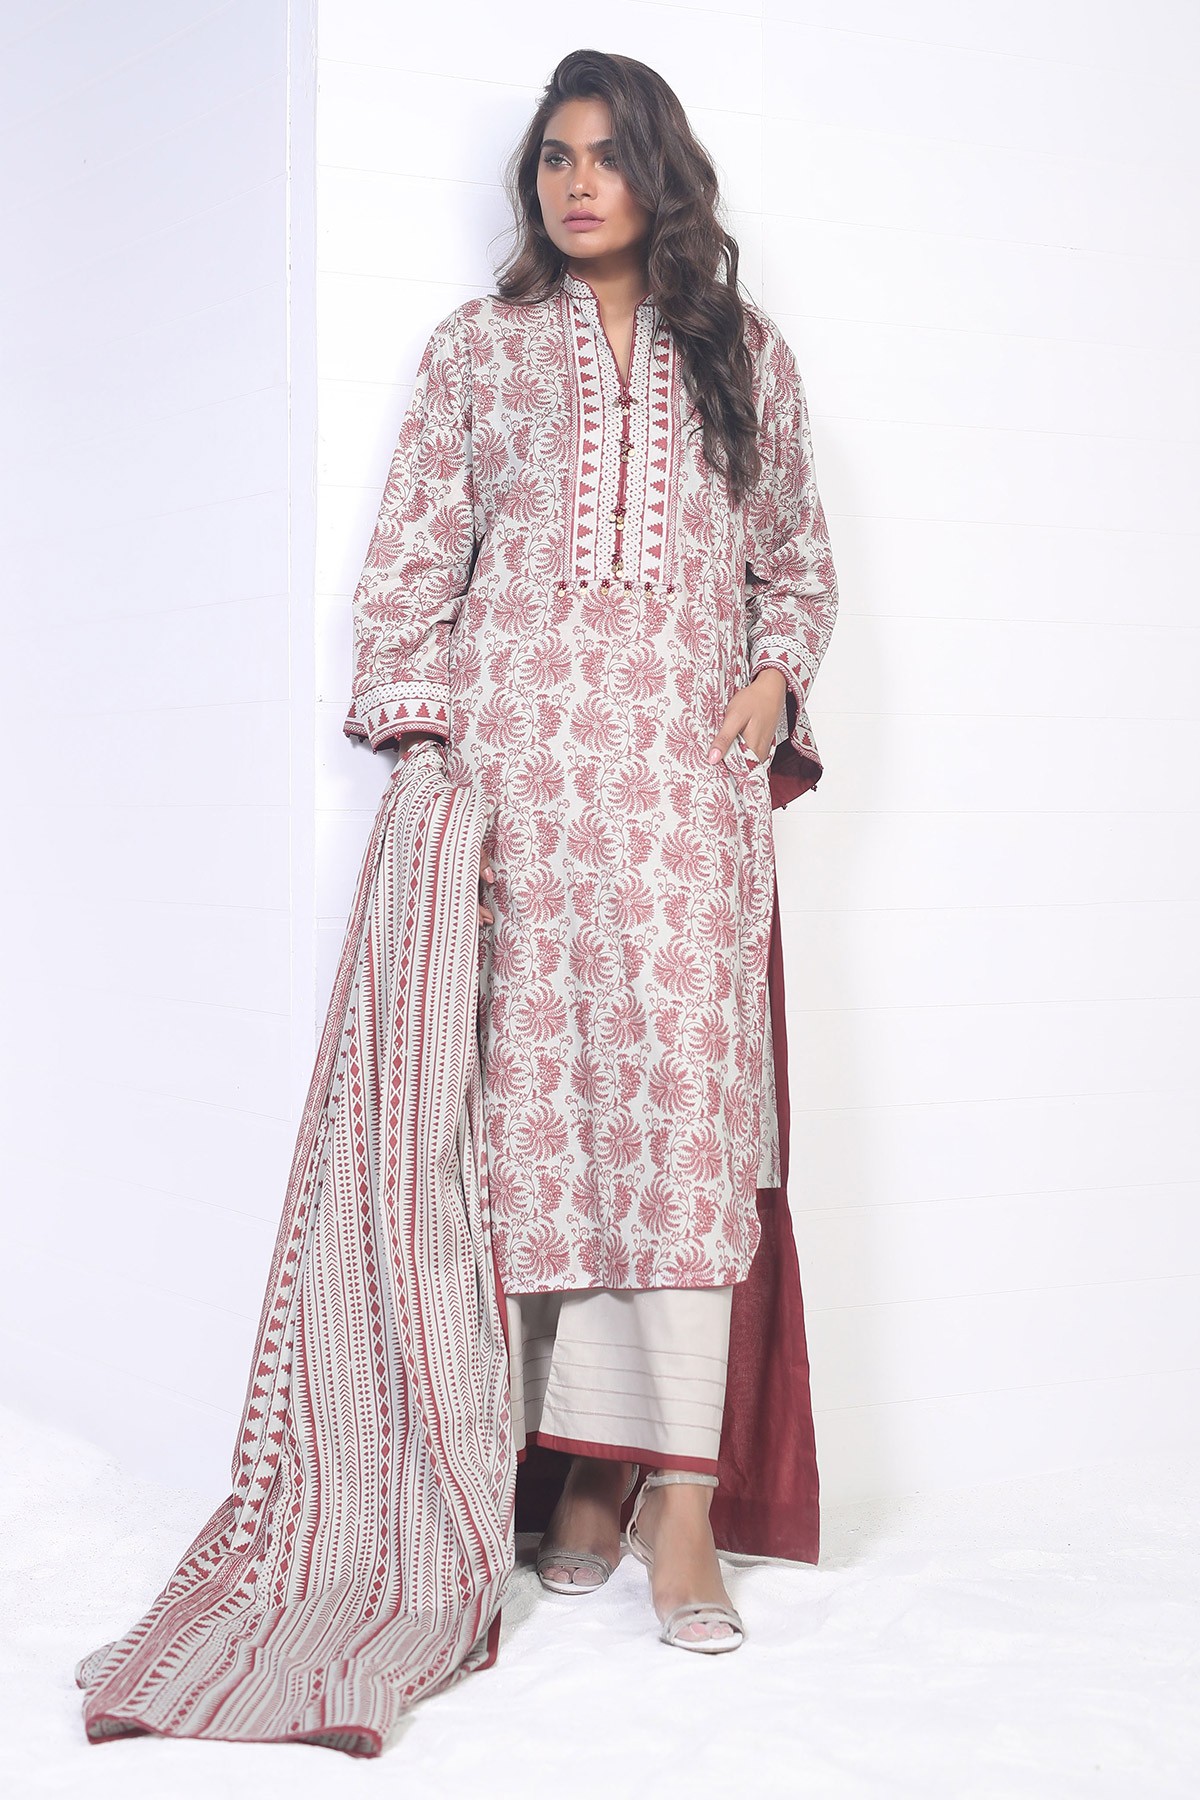 /2019/06/alkaram-studio-spring-summer-collection-2-piece-printed-suit-with-lawn-dupatta-ss-141-19-2-red-image1.jpeg